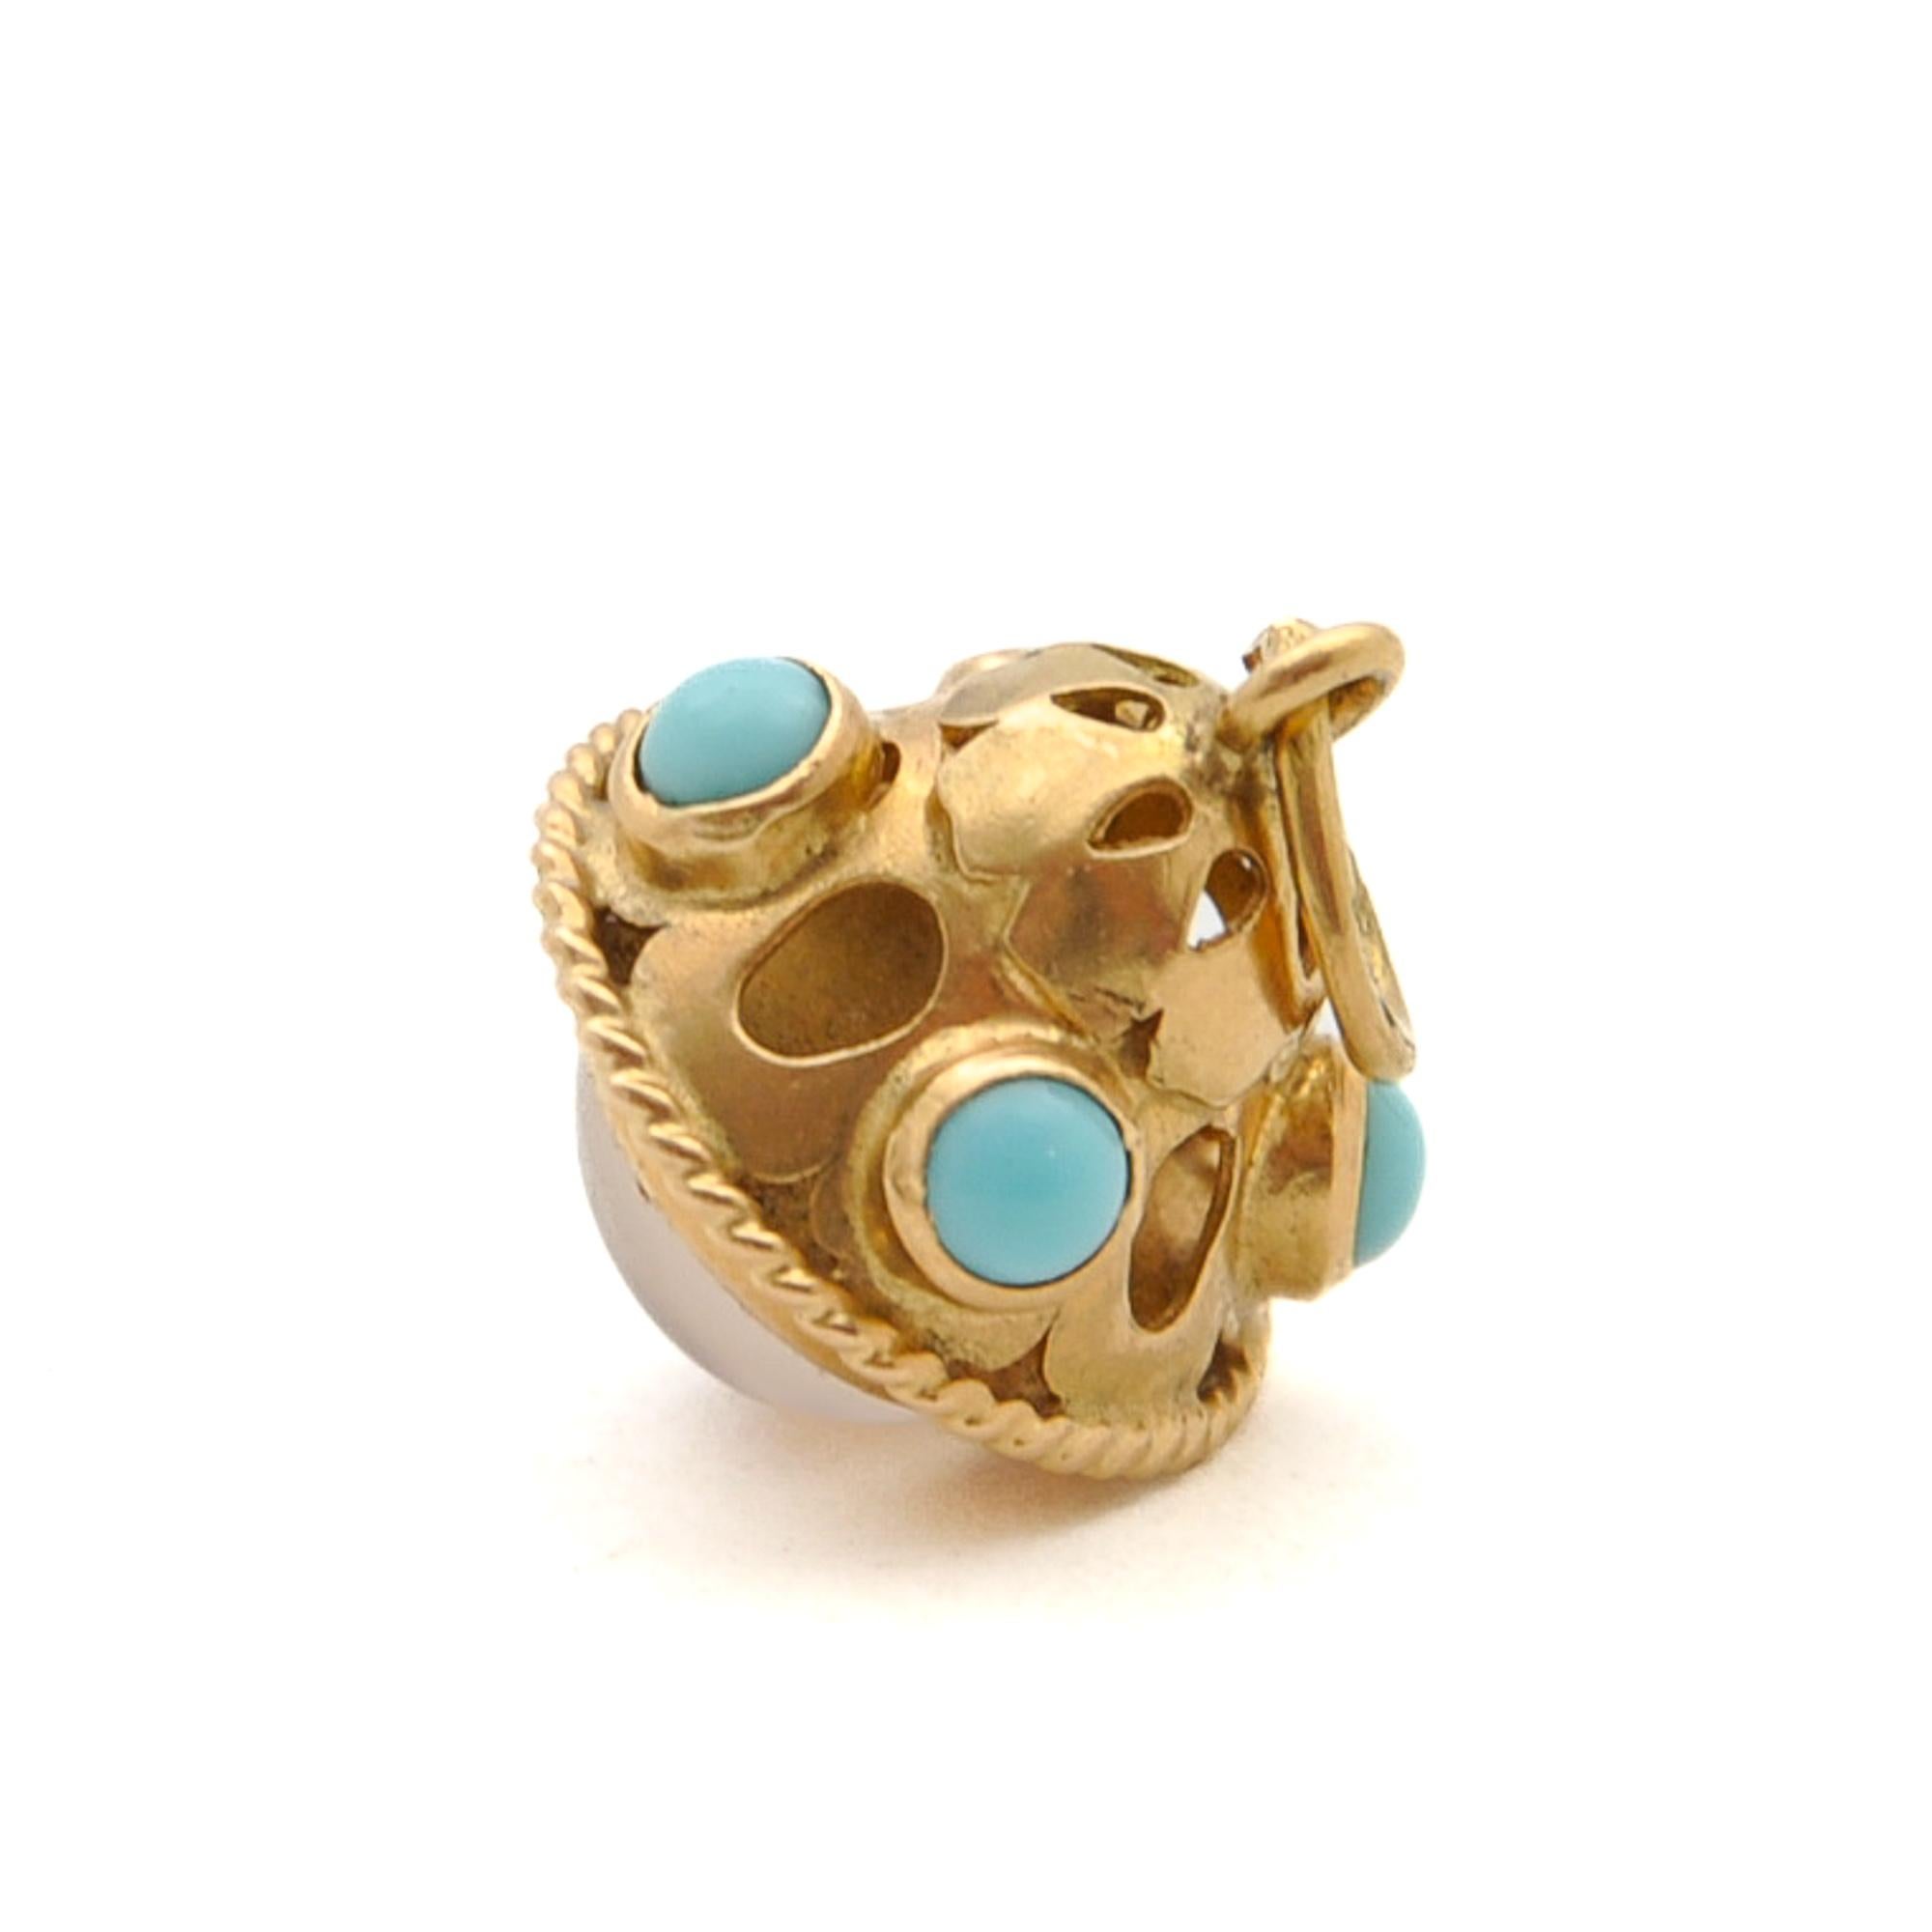 Vintage 18K Gold Turquoise and Moonstone Charm Pendant For Sale 1